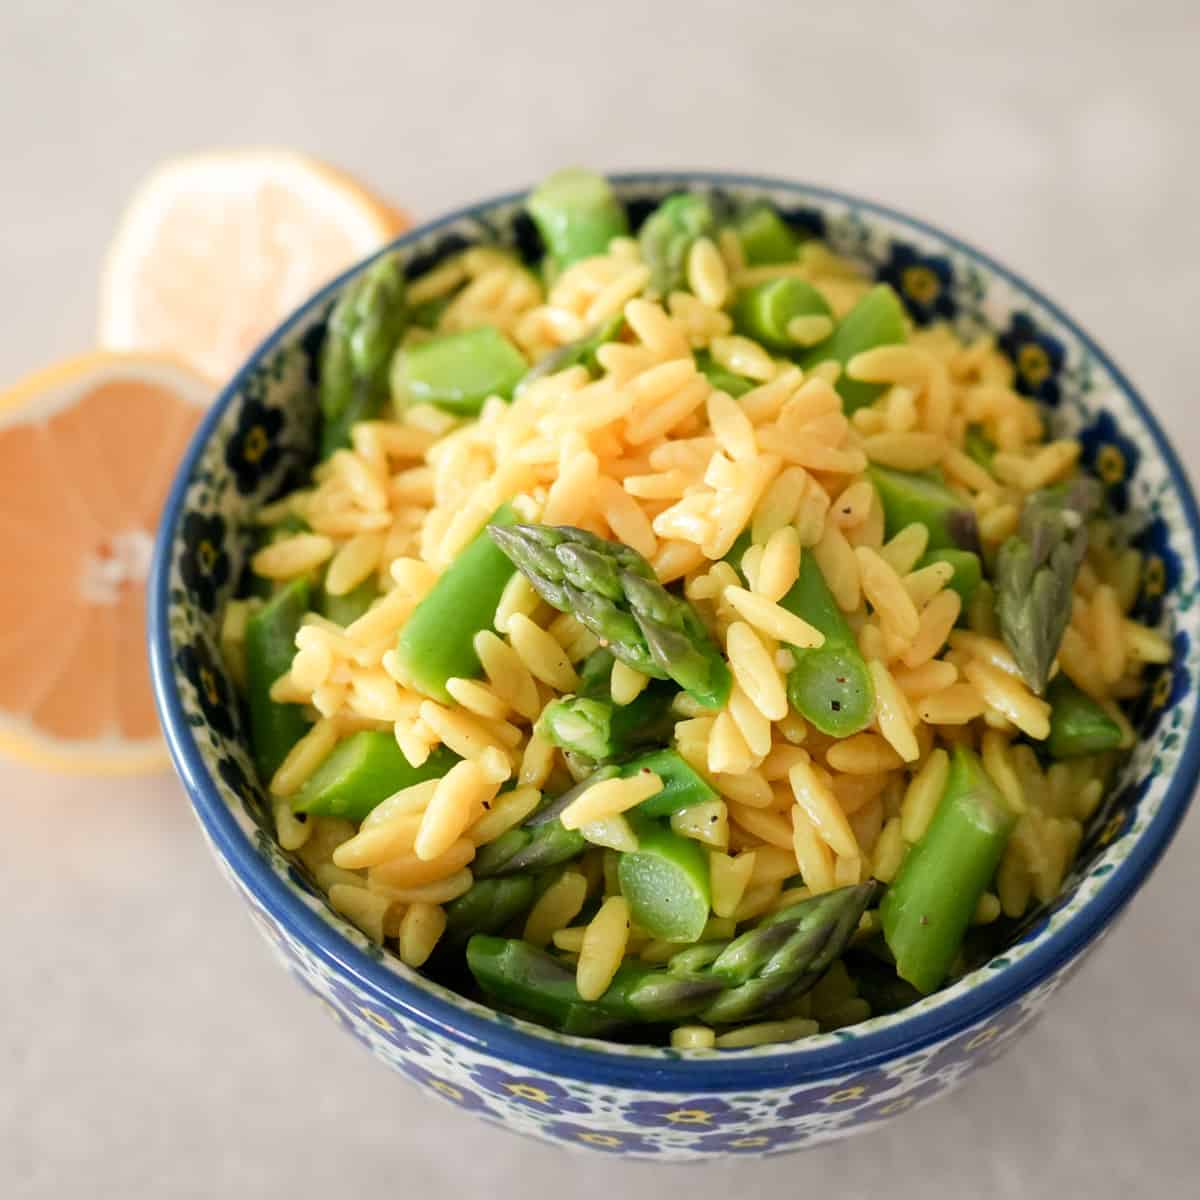 yellow orzo pasta and bright green asparagus pieces in blue flowered bowl